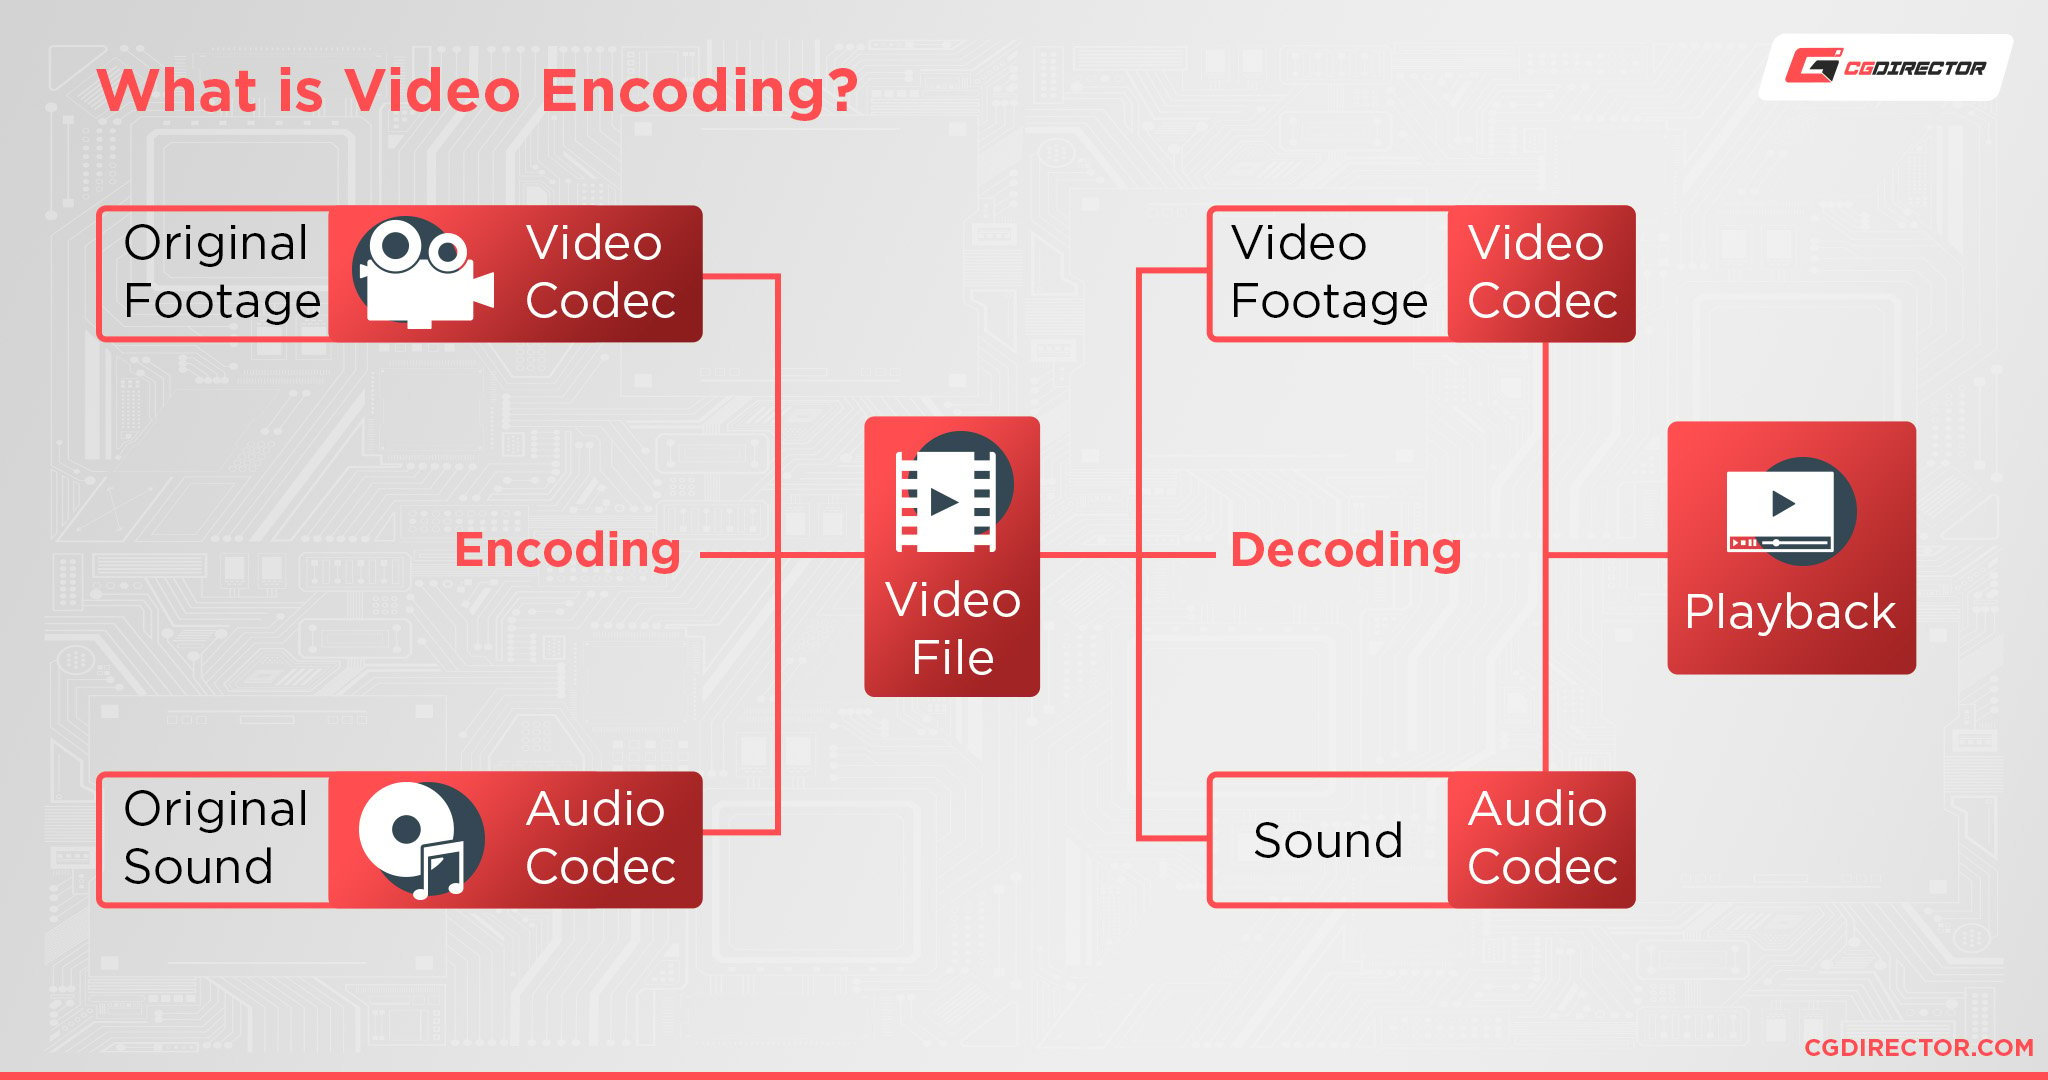 What is Video Encoding